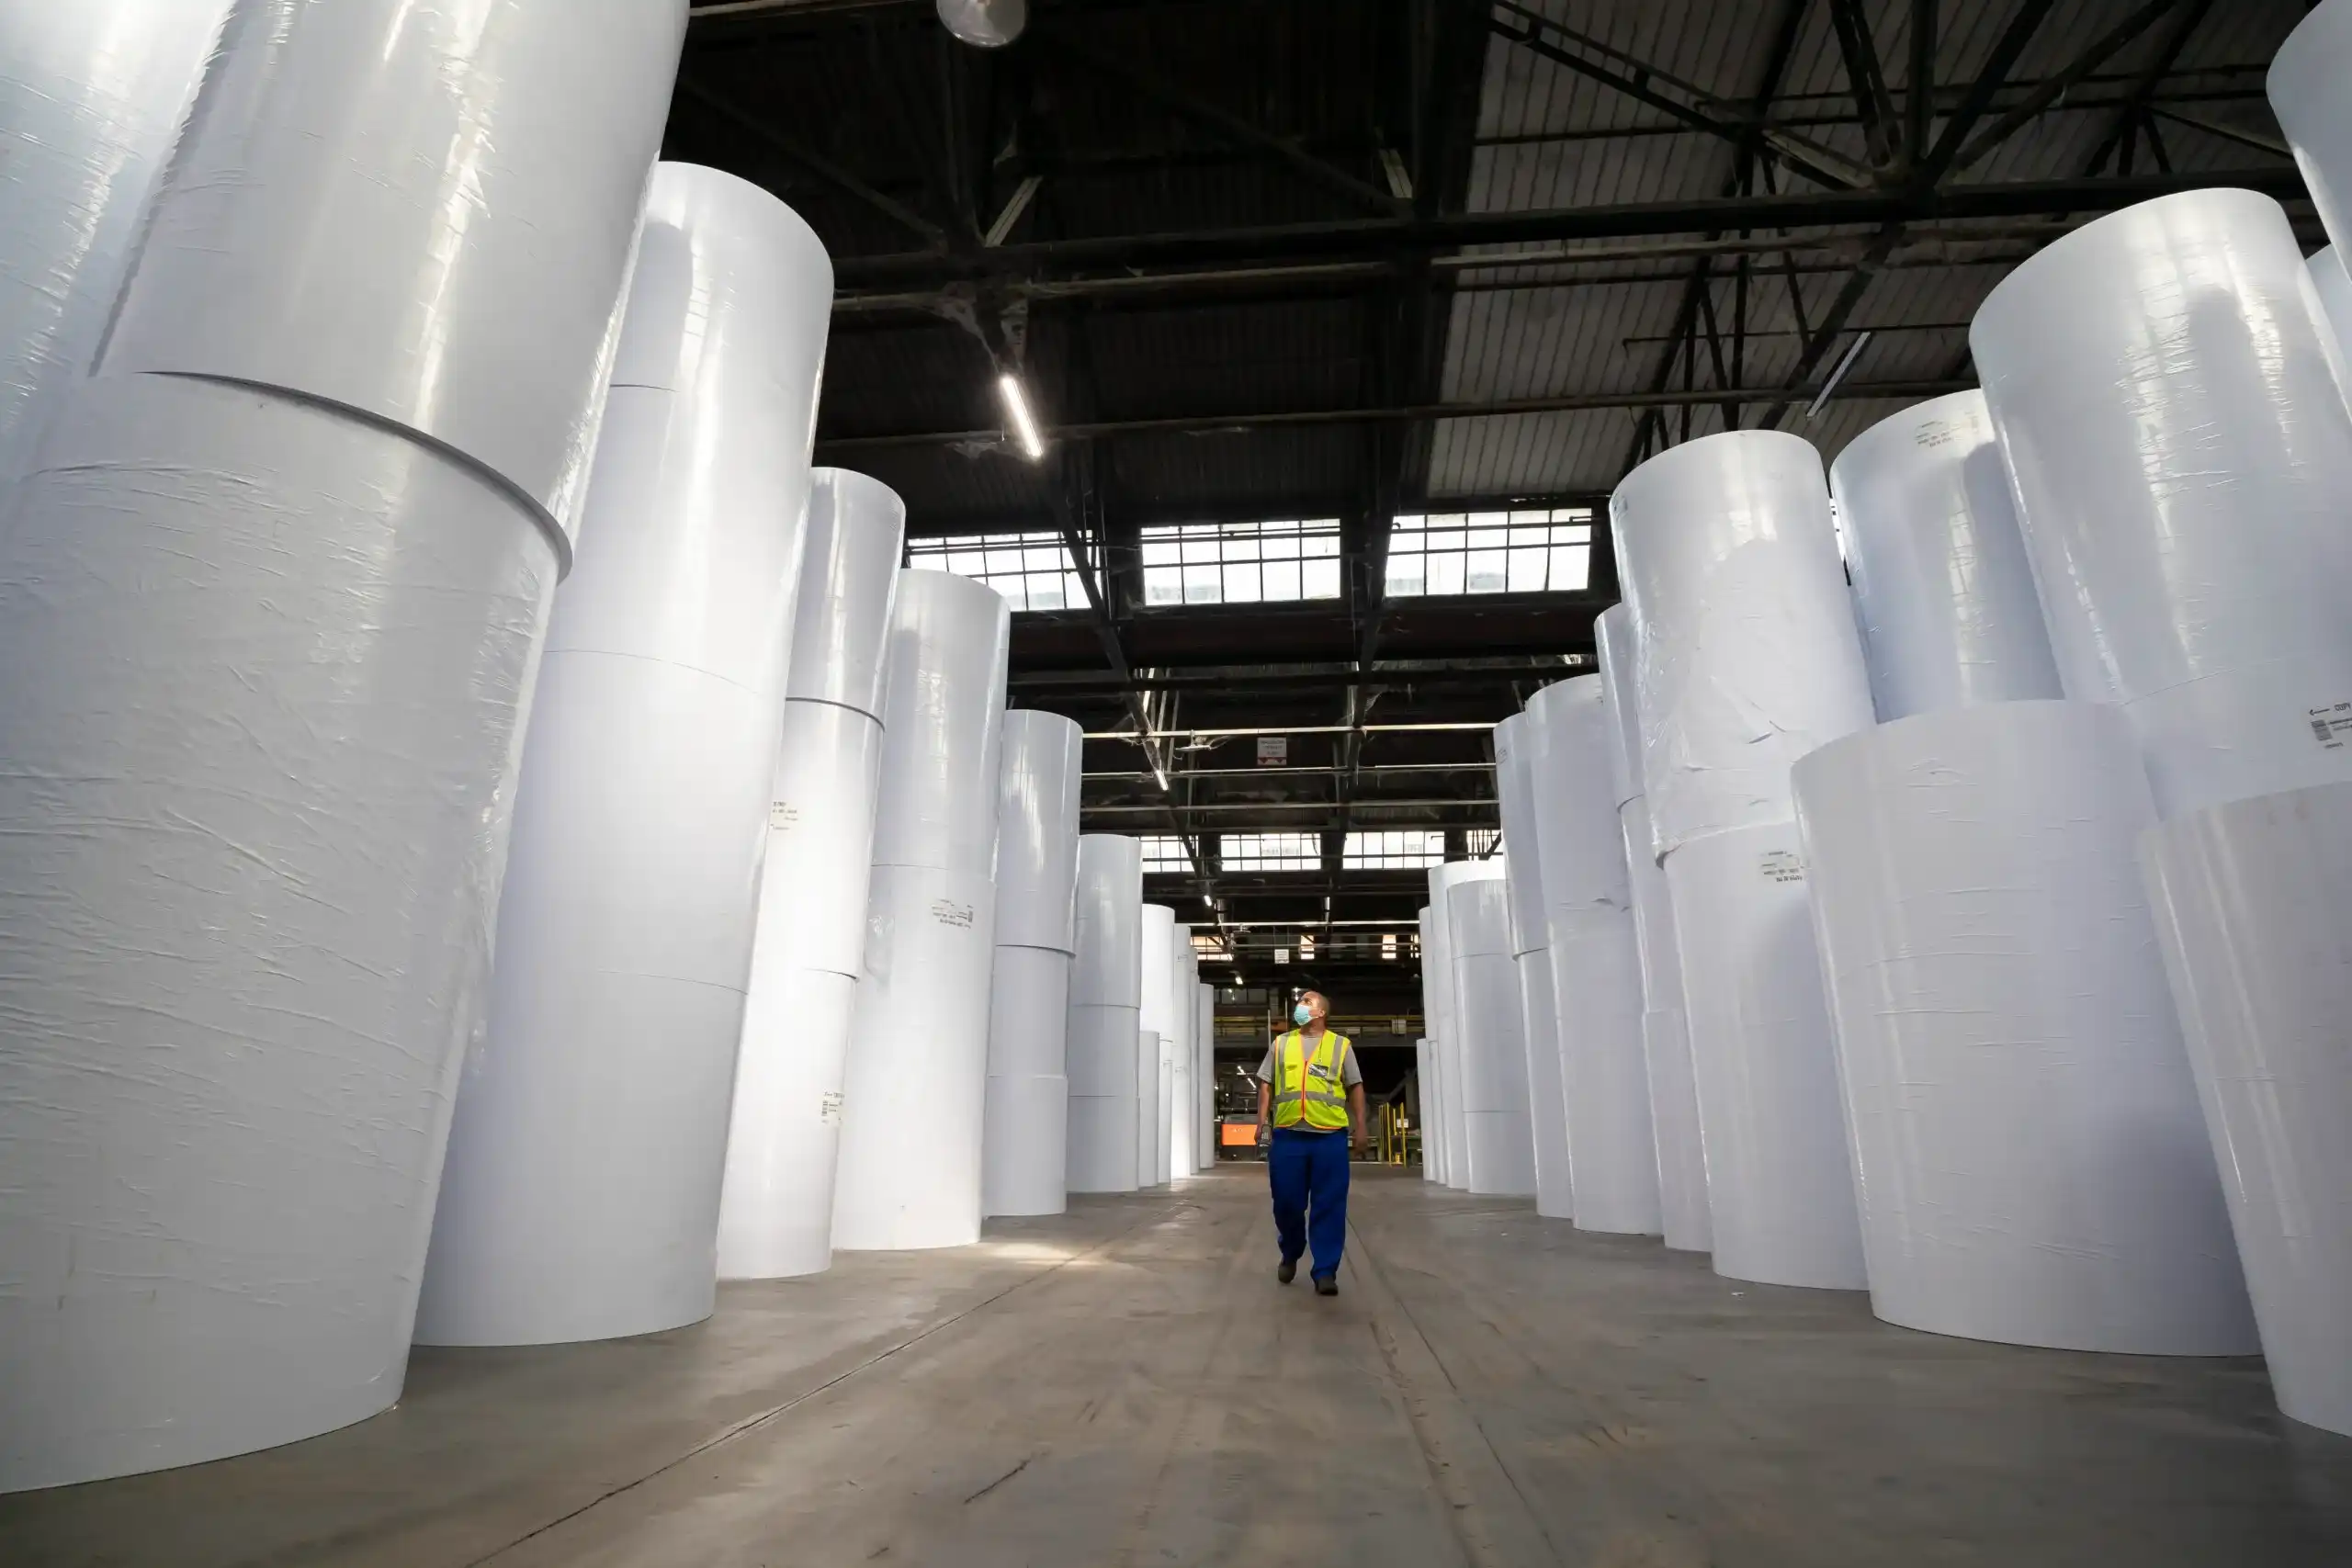 Worker standing between rows of paper reels produced at the Merebank paper mill.